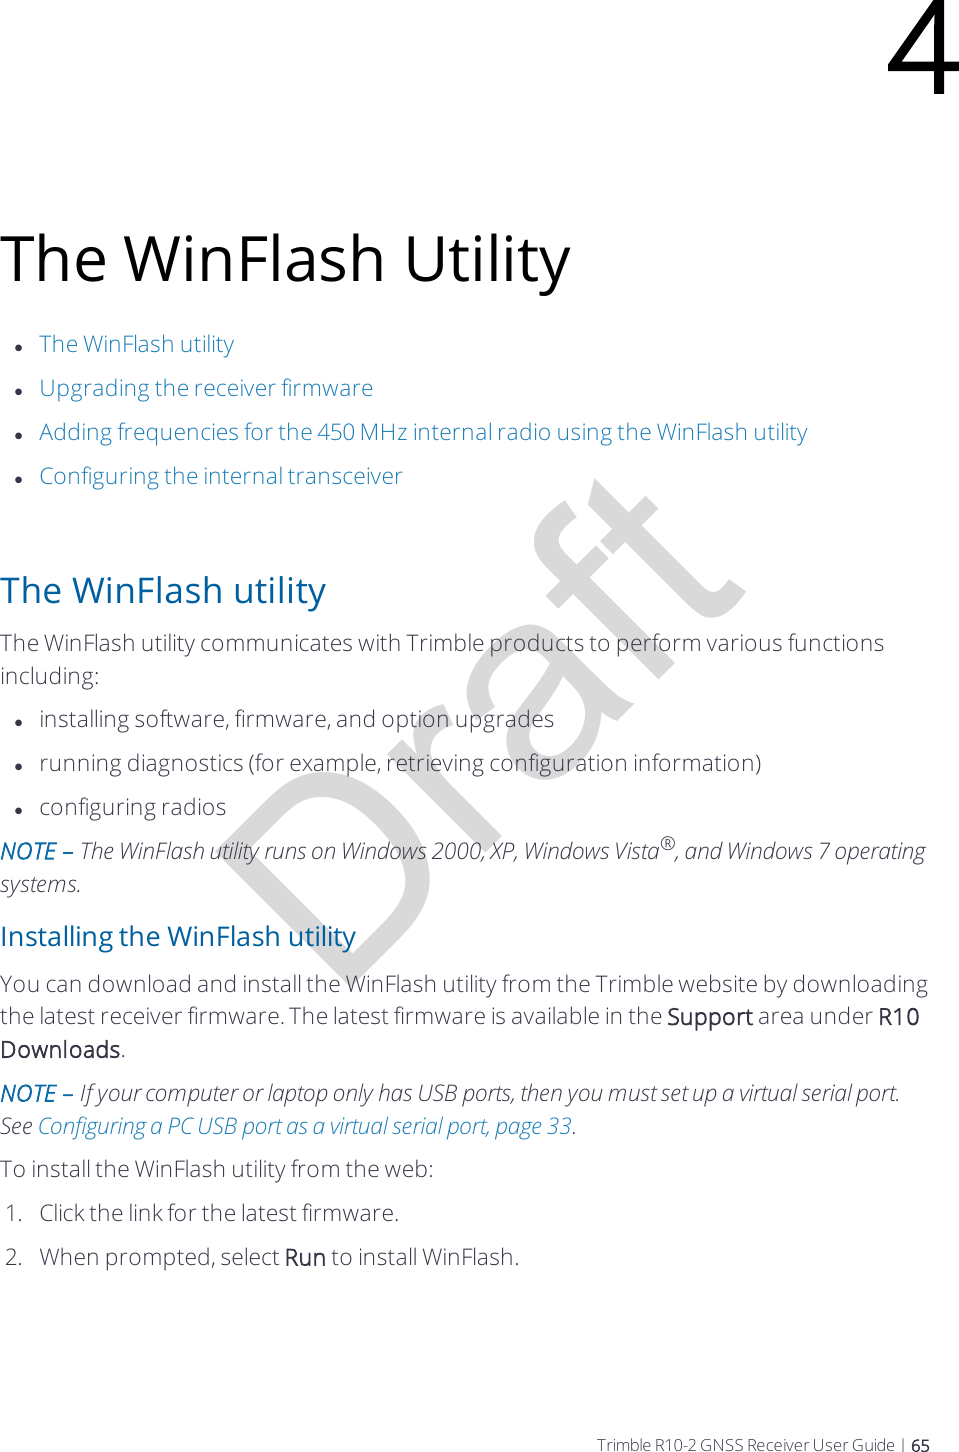 DraftThe WinFlash UtilitylThe WinFlash utilitylUpgrading the receiver firmwarelAdding frequencies for the 450 MHz internal radio using the WinFlash utilitylConfiguring the internal transceiverThe WinFlash utilityThe WinFlash utility communicates with Trimble products to perform various functions including:linstalling software, firmware, and option upgradeslrunning diagnostics (for example, retrieving configuration information)lconfiguring radiosNOTE – The WinFlash utility runs on Windows 2000, XP, Windows Vista®, and Windows 7 operating systems.Installing the WinFlash utilityYou can download and install the WinFlash utility from the Trimble website by downloading the latest receiver firmware. The latest firmware is available in the Support area under R10 Downloads.NOTE – If your computer or laptop only has USB ports, then you must set up a virtual serial port. See Configuring a PC USB port as a virtual serial port, page 33.To install the WinFlash utility from the web:1.  Click the link for the latest firmware.2.  When prompted, select Run to install WinFlash.4Trimble R10-2 GNSS Receiver User Guide | 65